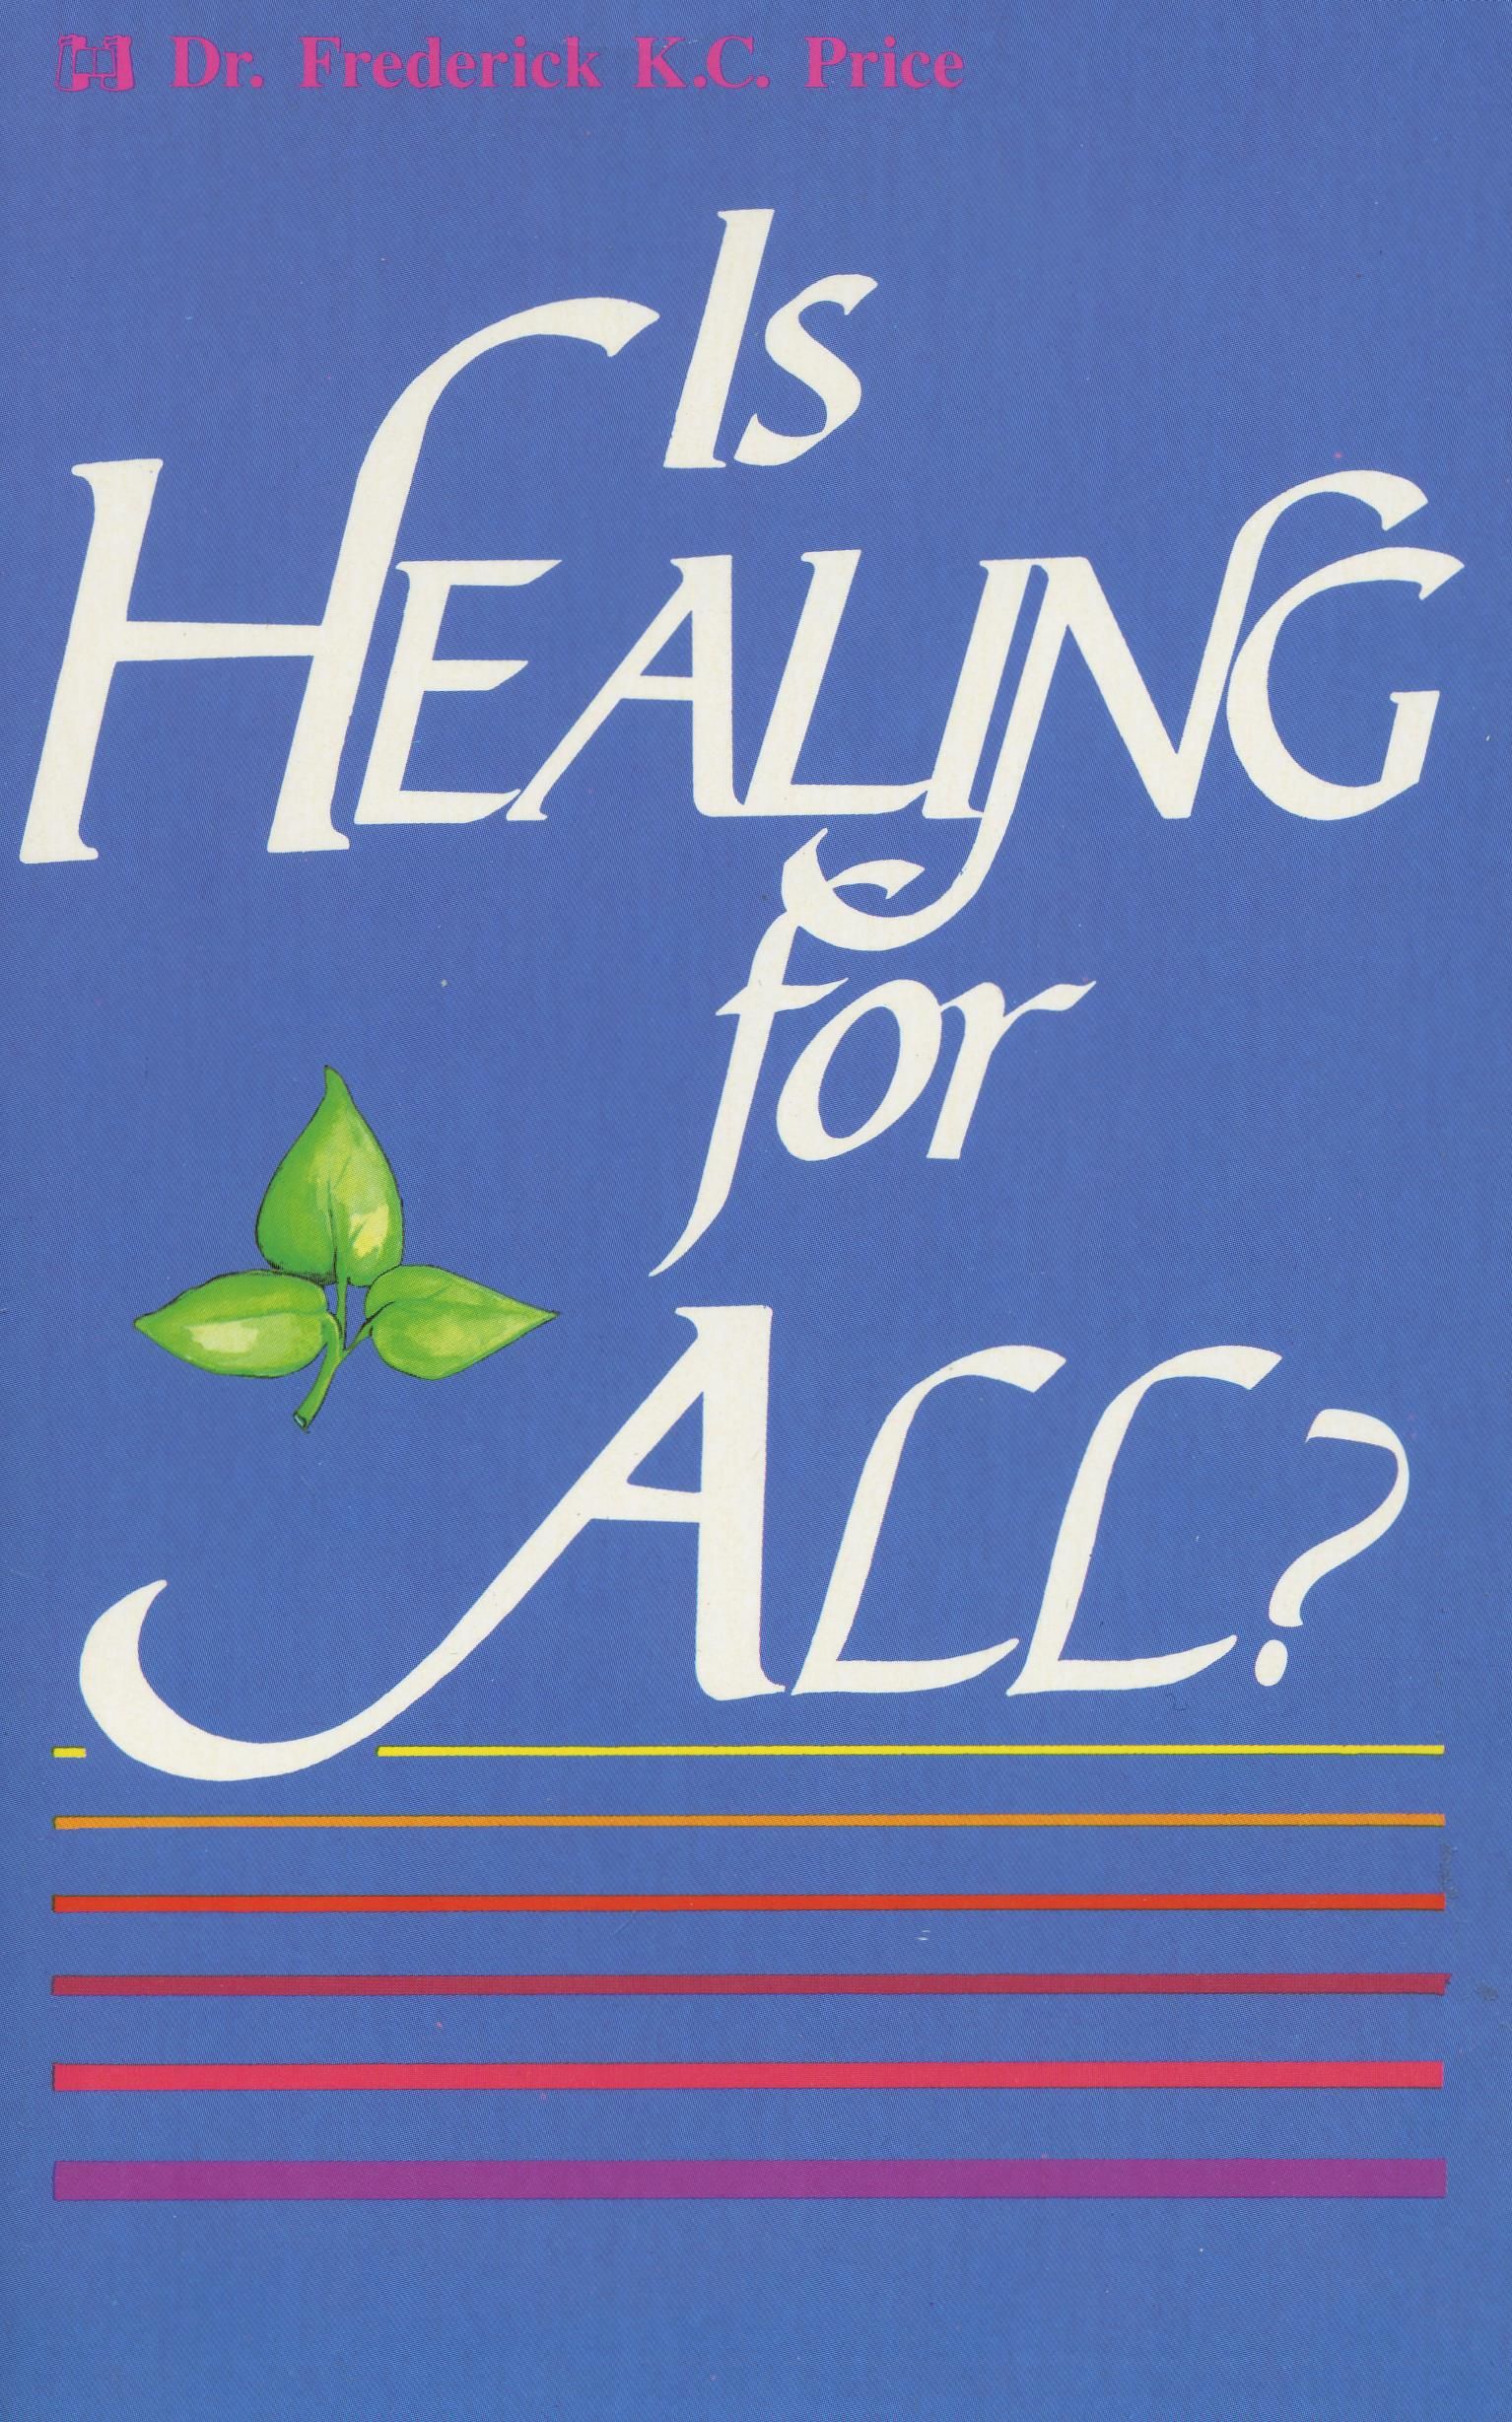 F.K.C.Price: Is Healing for all?